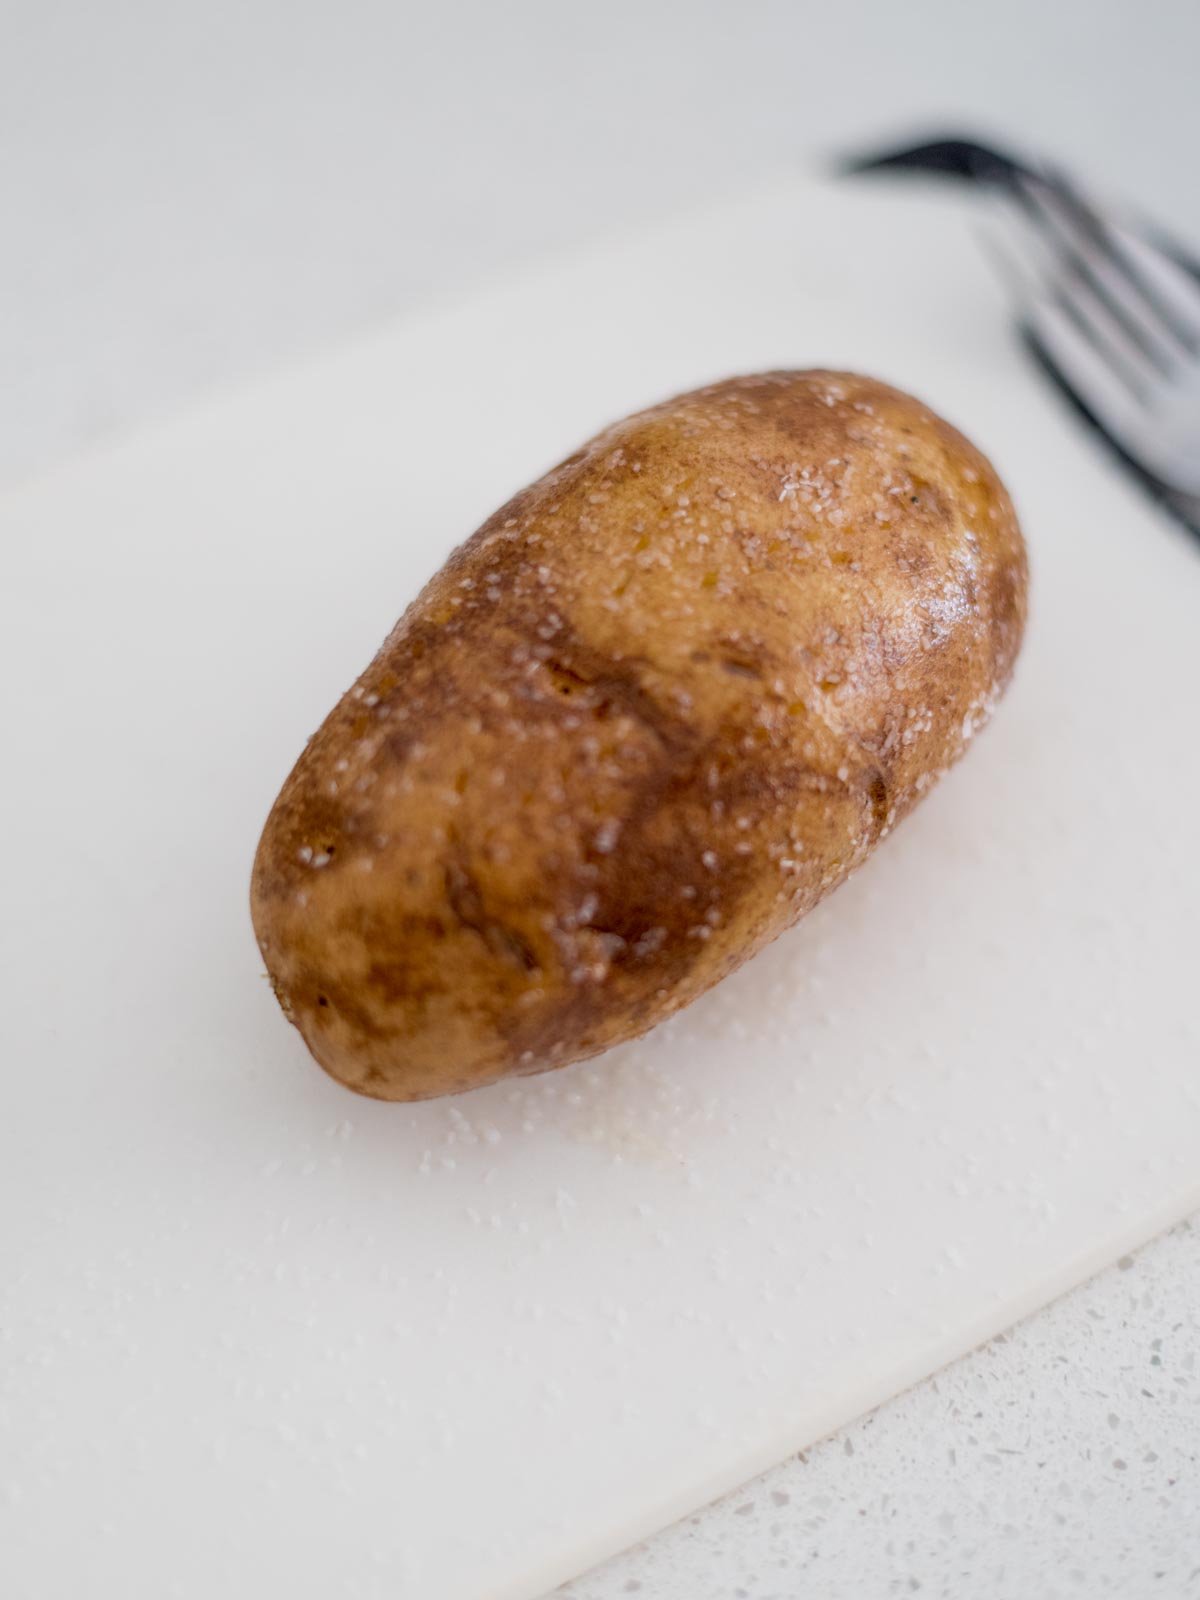 A whole potato rubbed with oil and salt.